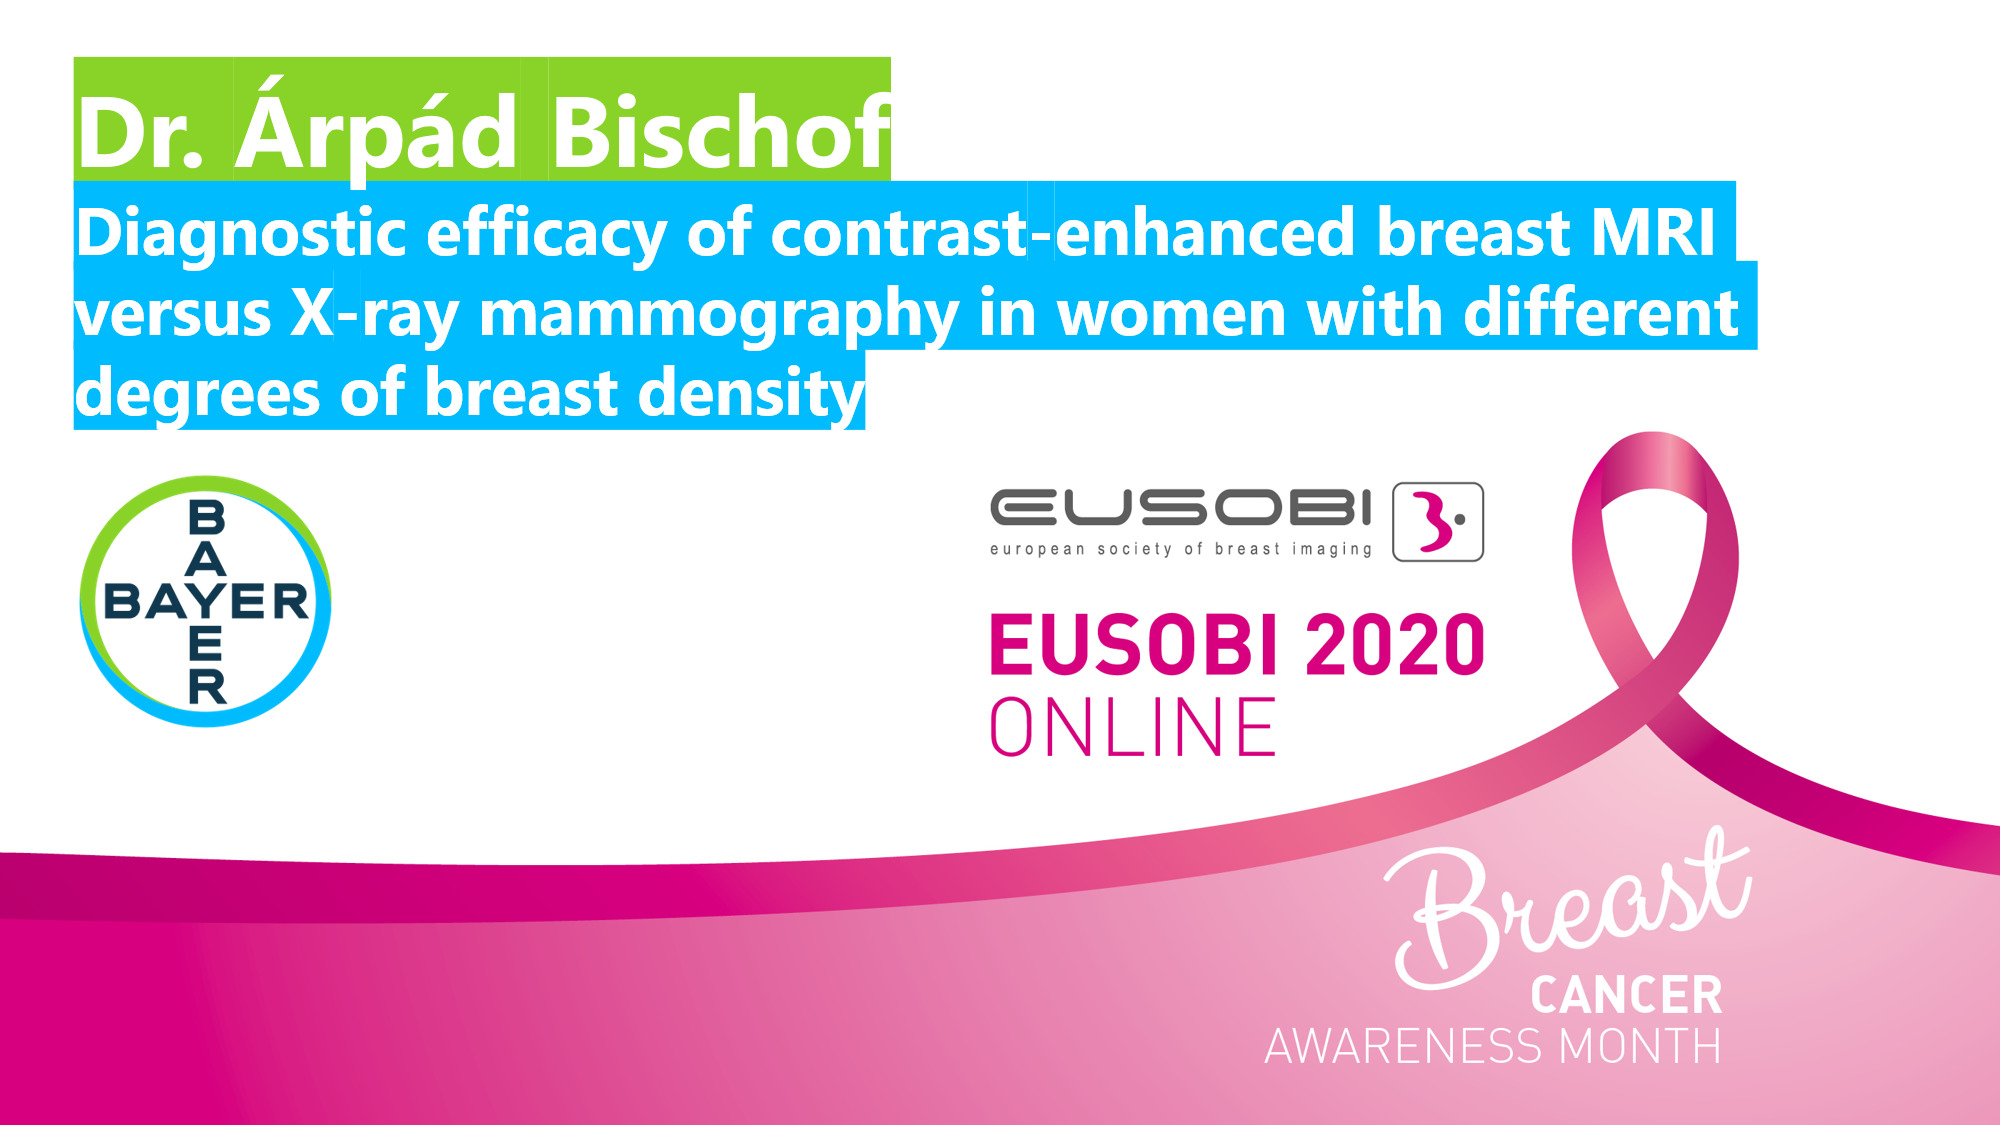 I20 – Diagnostic efficacy of contrast-enhanced breast MRI versus X-ray mammography in women with different degrees of breast density